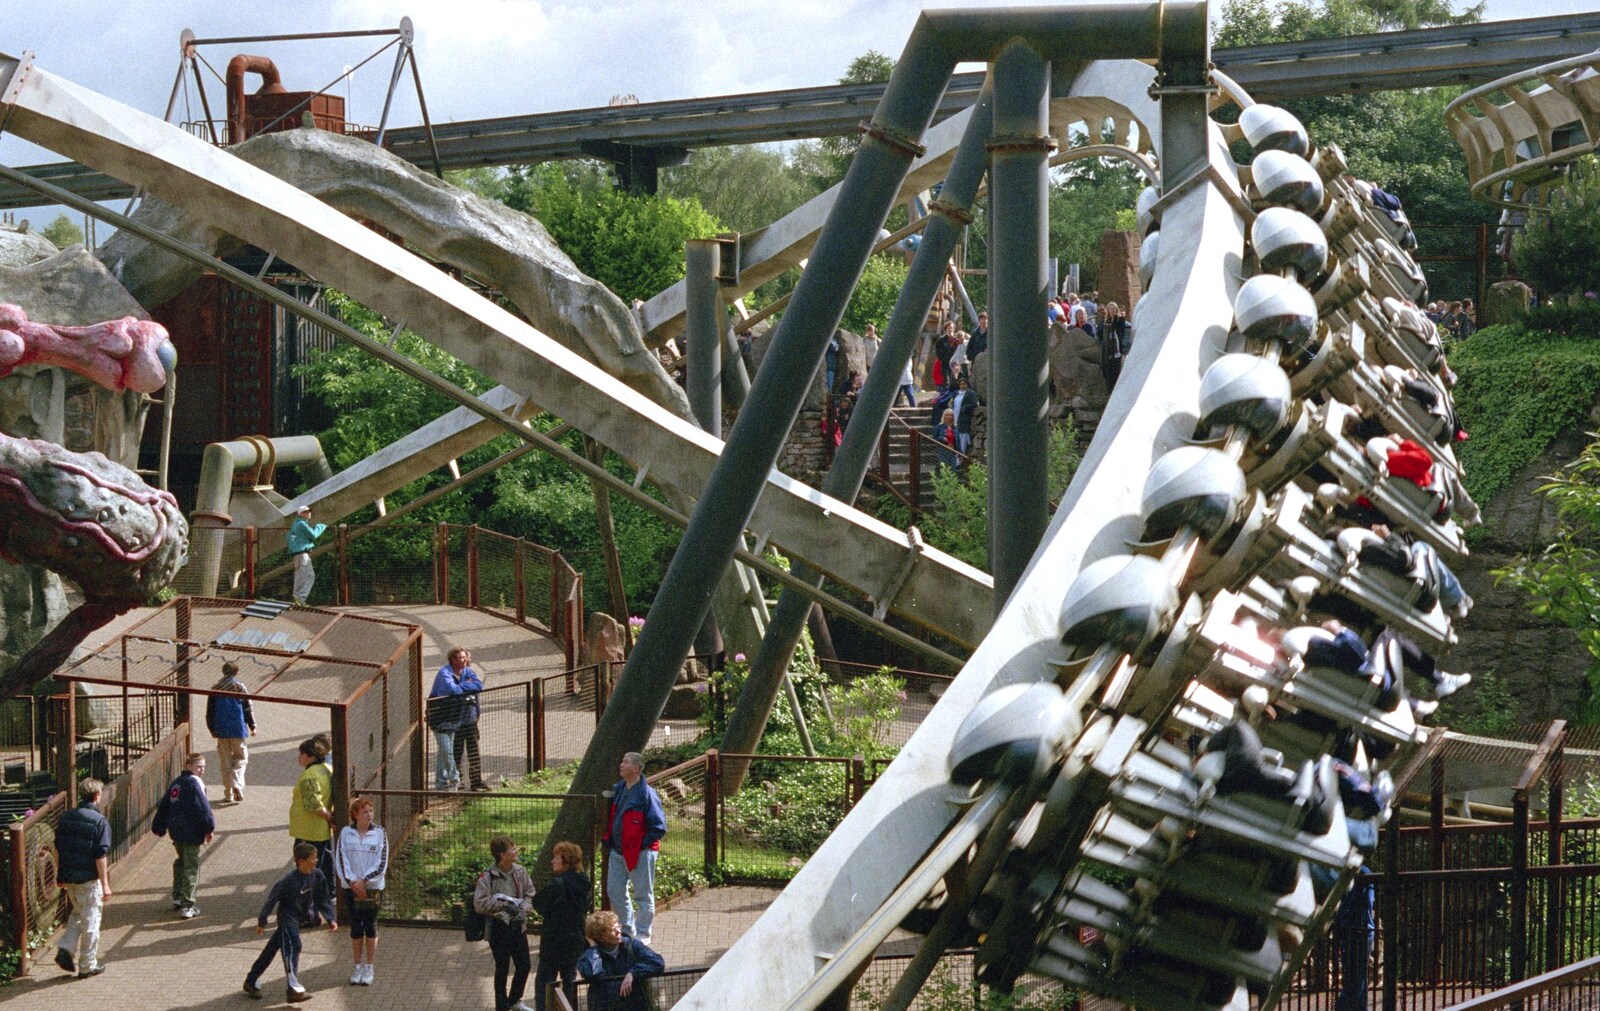 A Trip to Alton Towers, Staffordshire - 15th June 2000: A tangle of rollercoasters